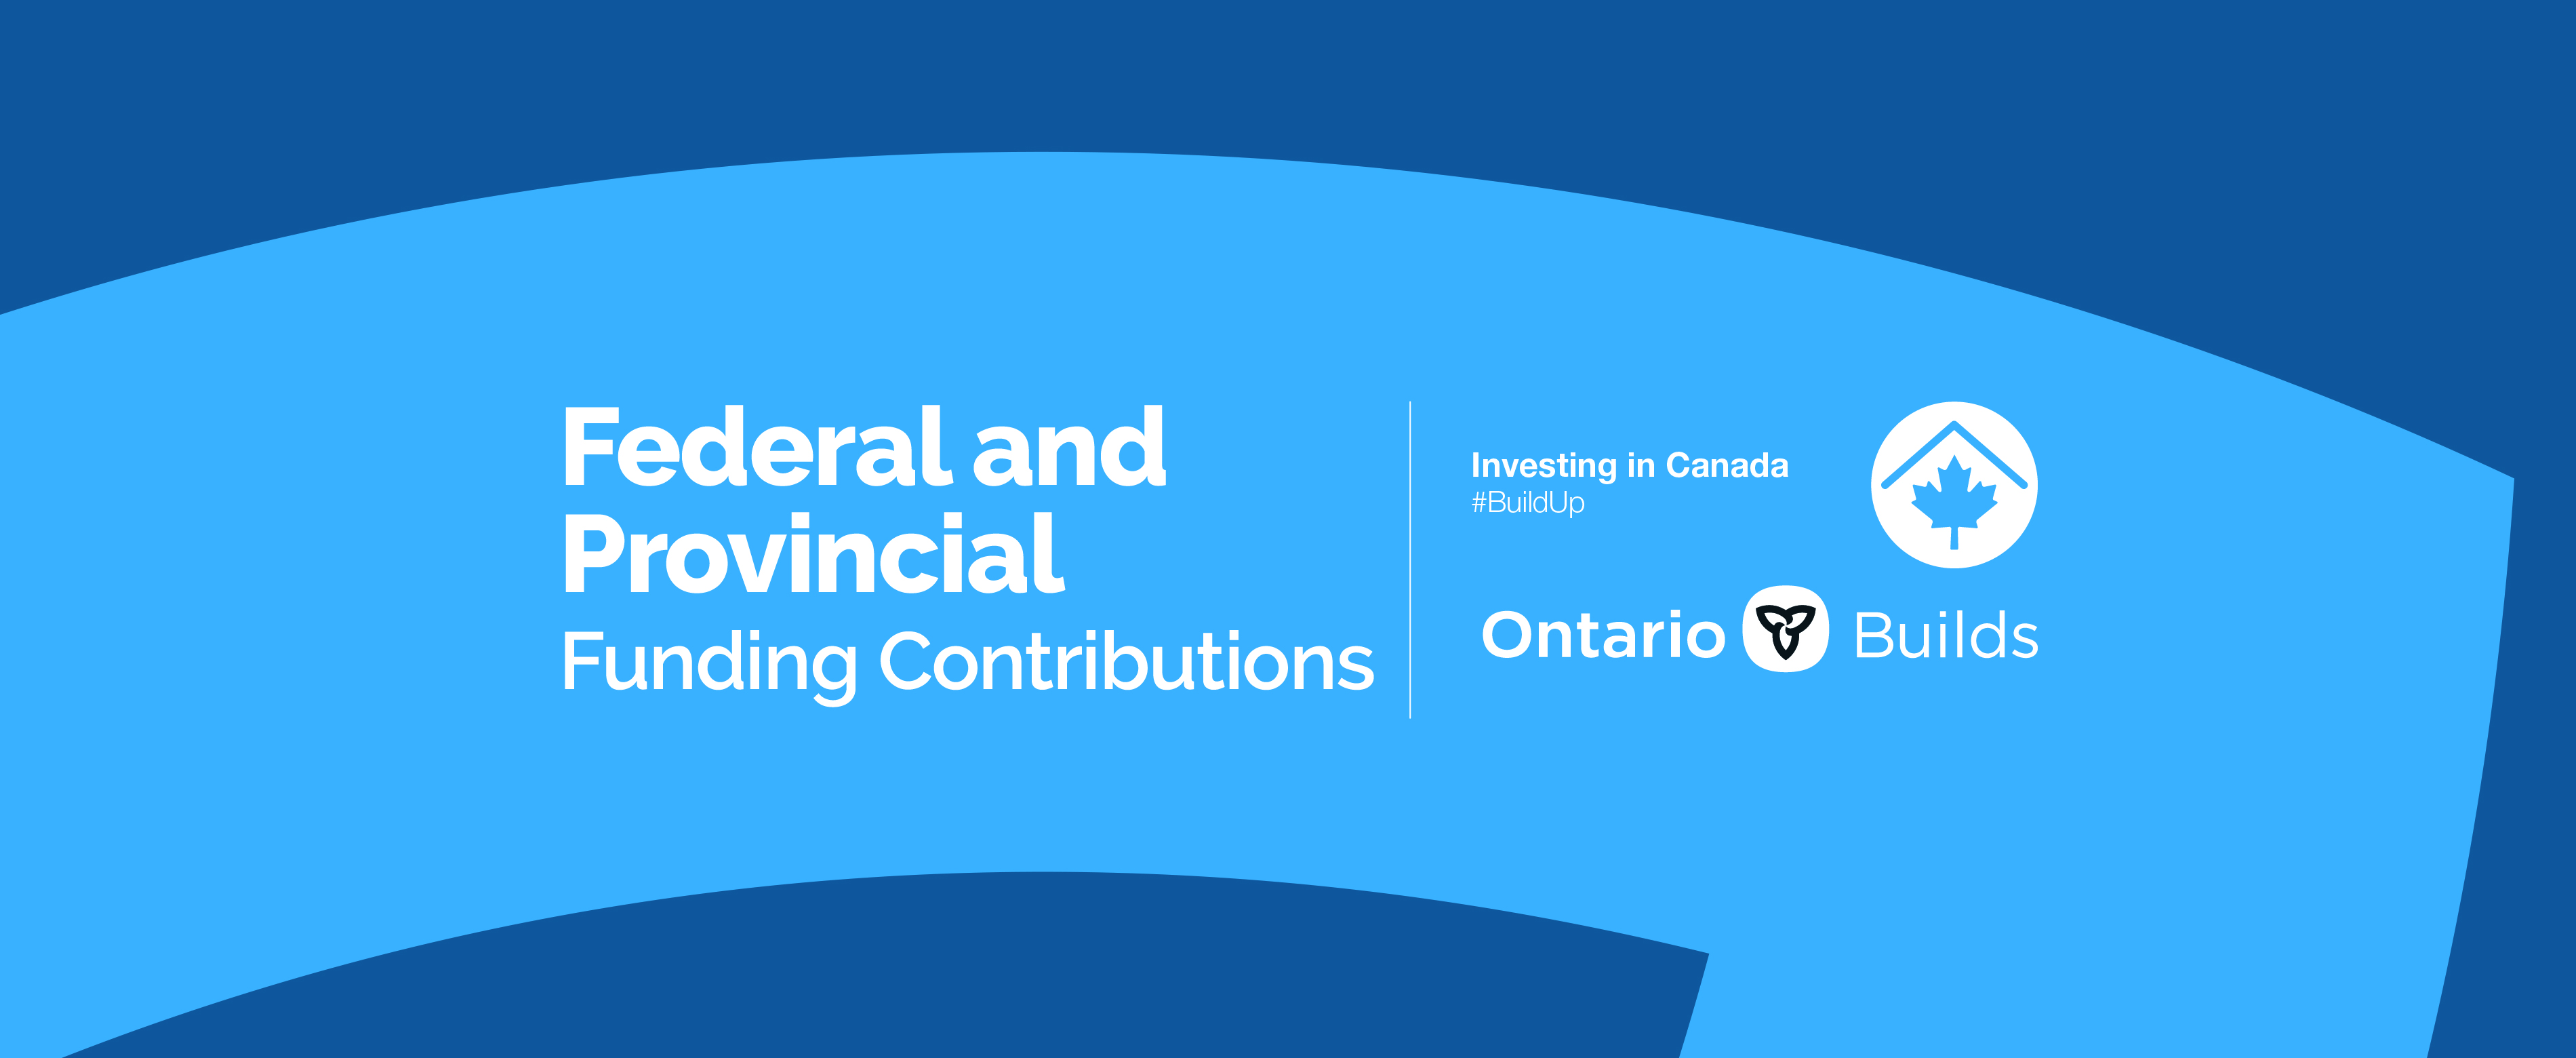 Federal and Provincial Funding Contributions: Investing in Canada, Ontario Builds